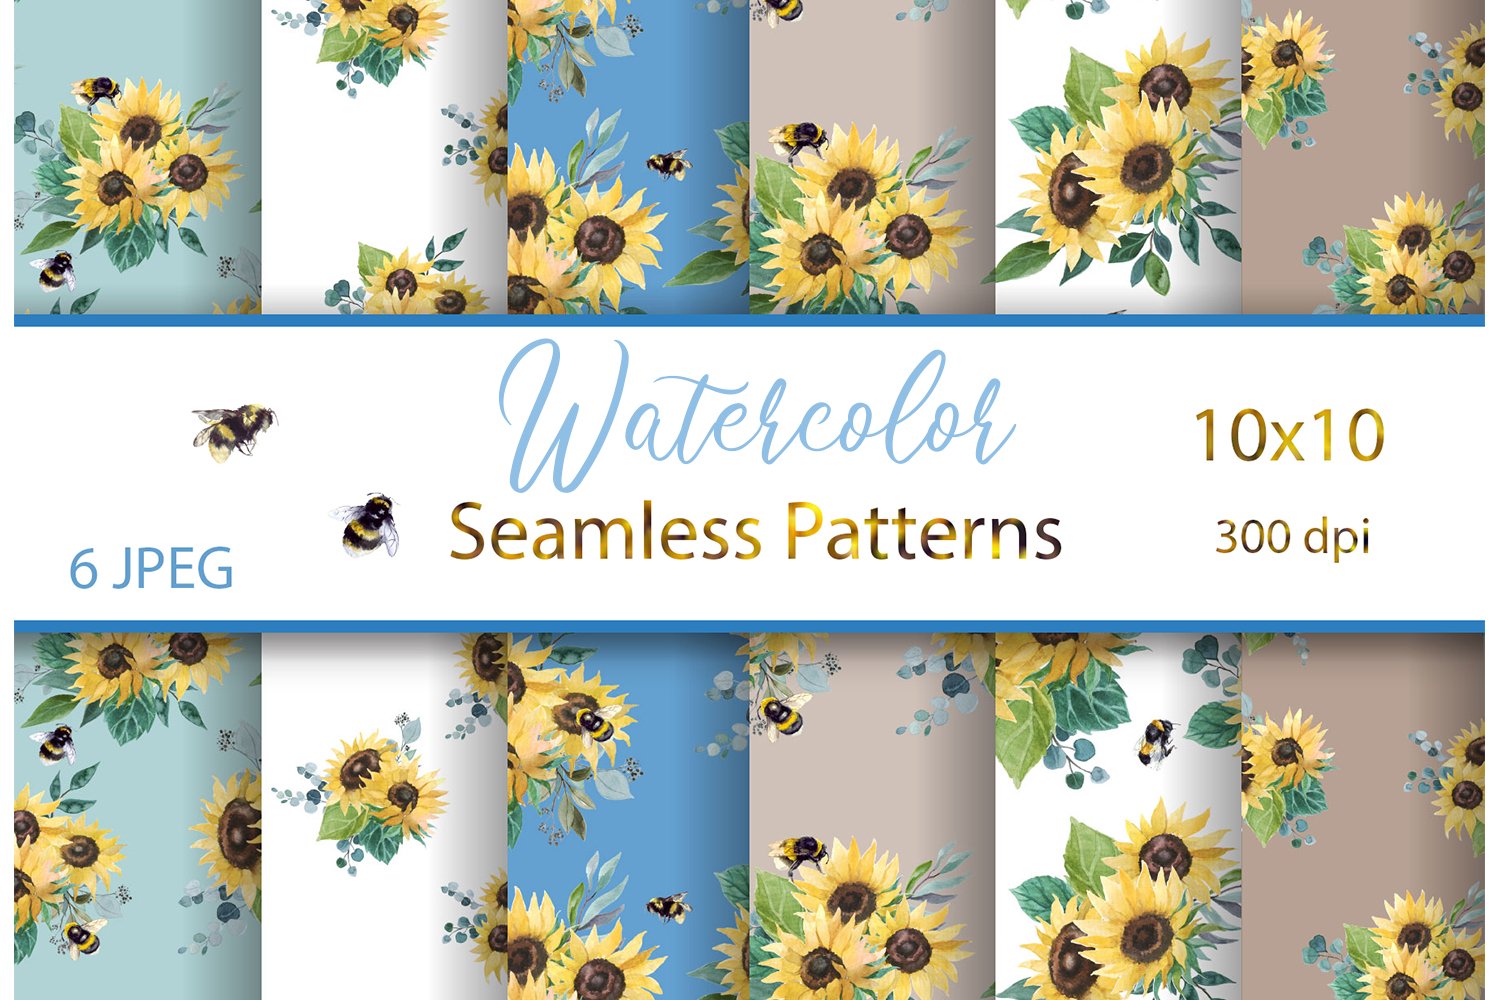 Watercolor bees seamless patterns cover image.